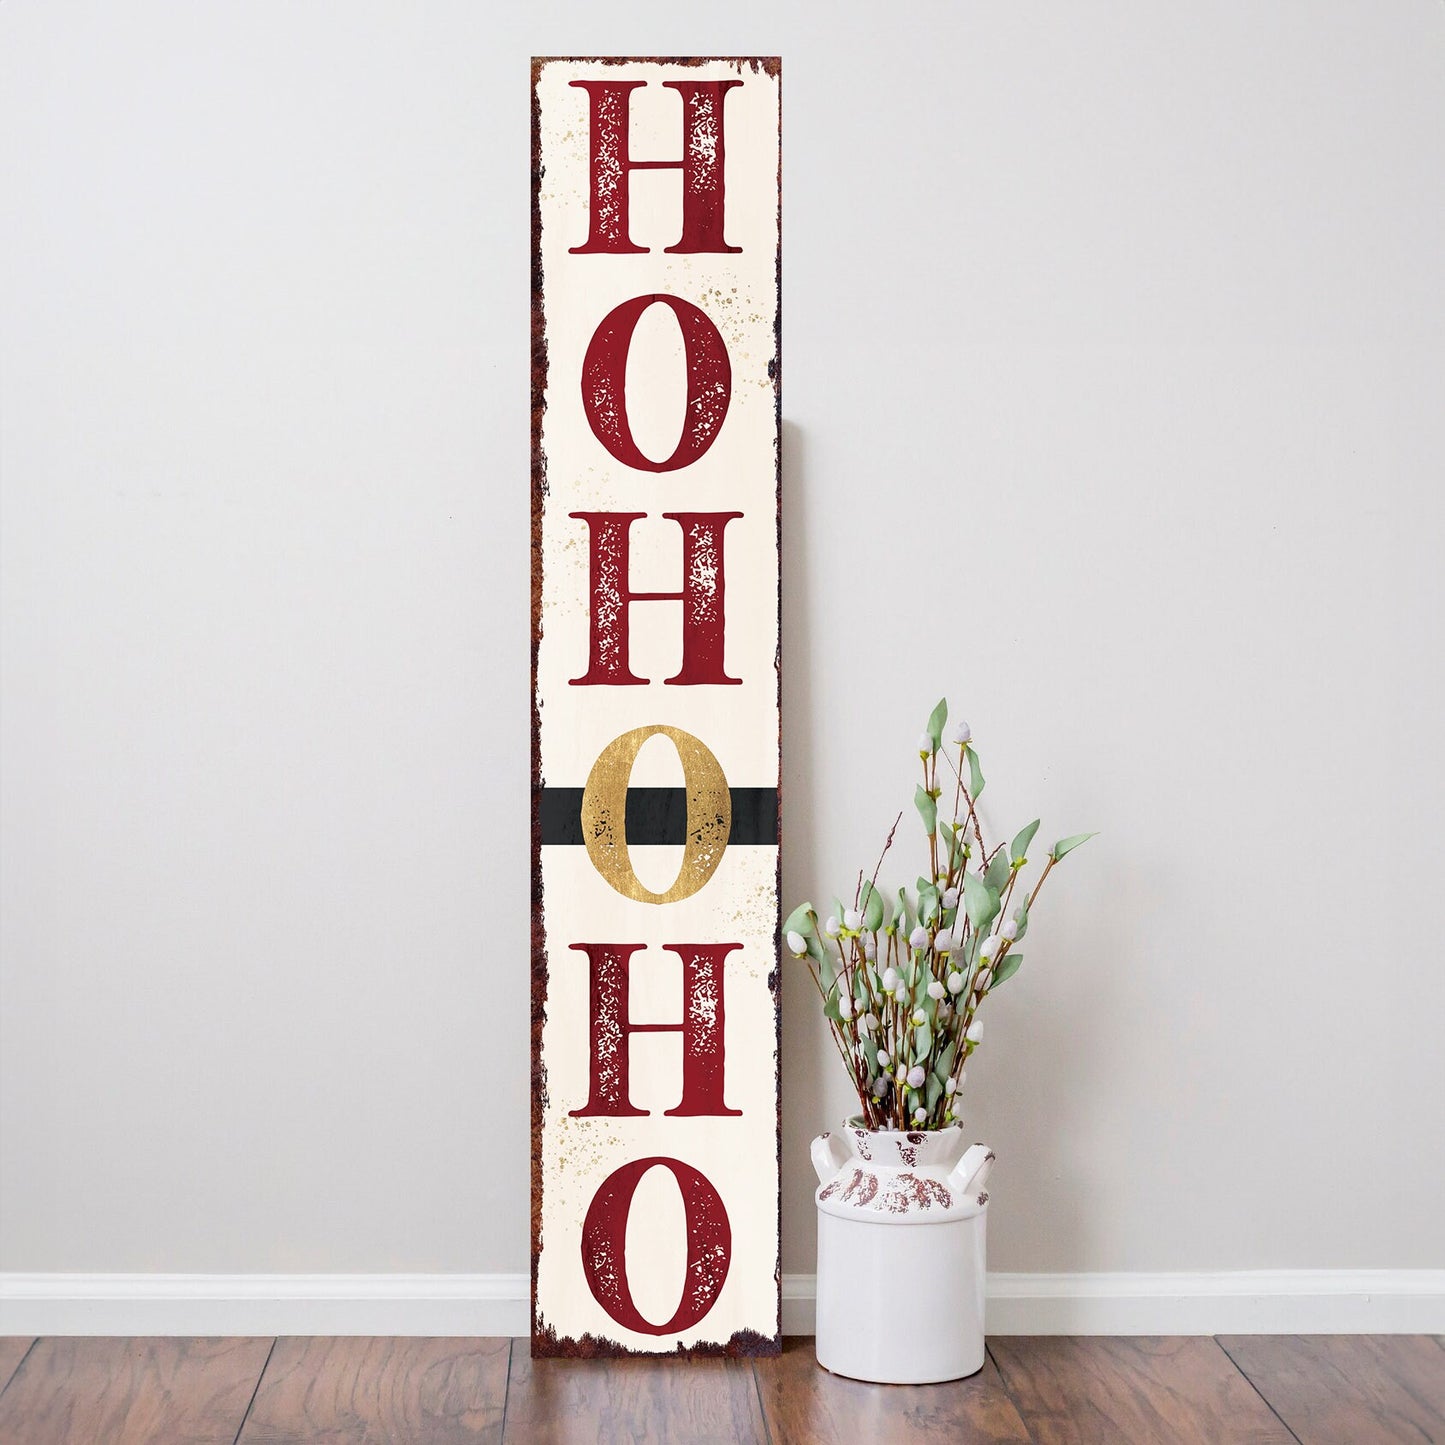 48in "Ho Ho Ho" Christmas Porch Sign | Front Porch Welcome Decor | Rustic Modern Farmhouse Entryway Board